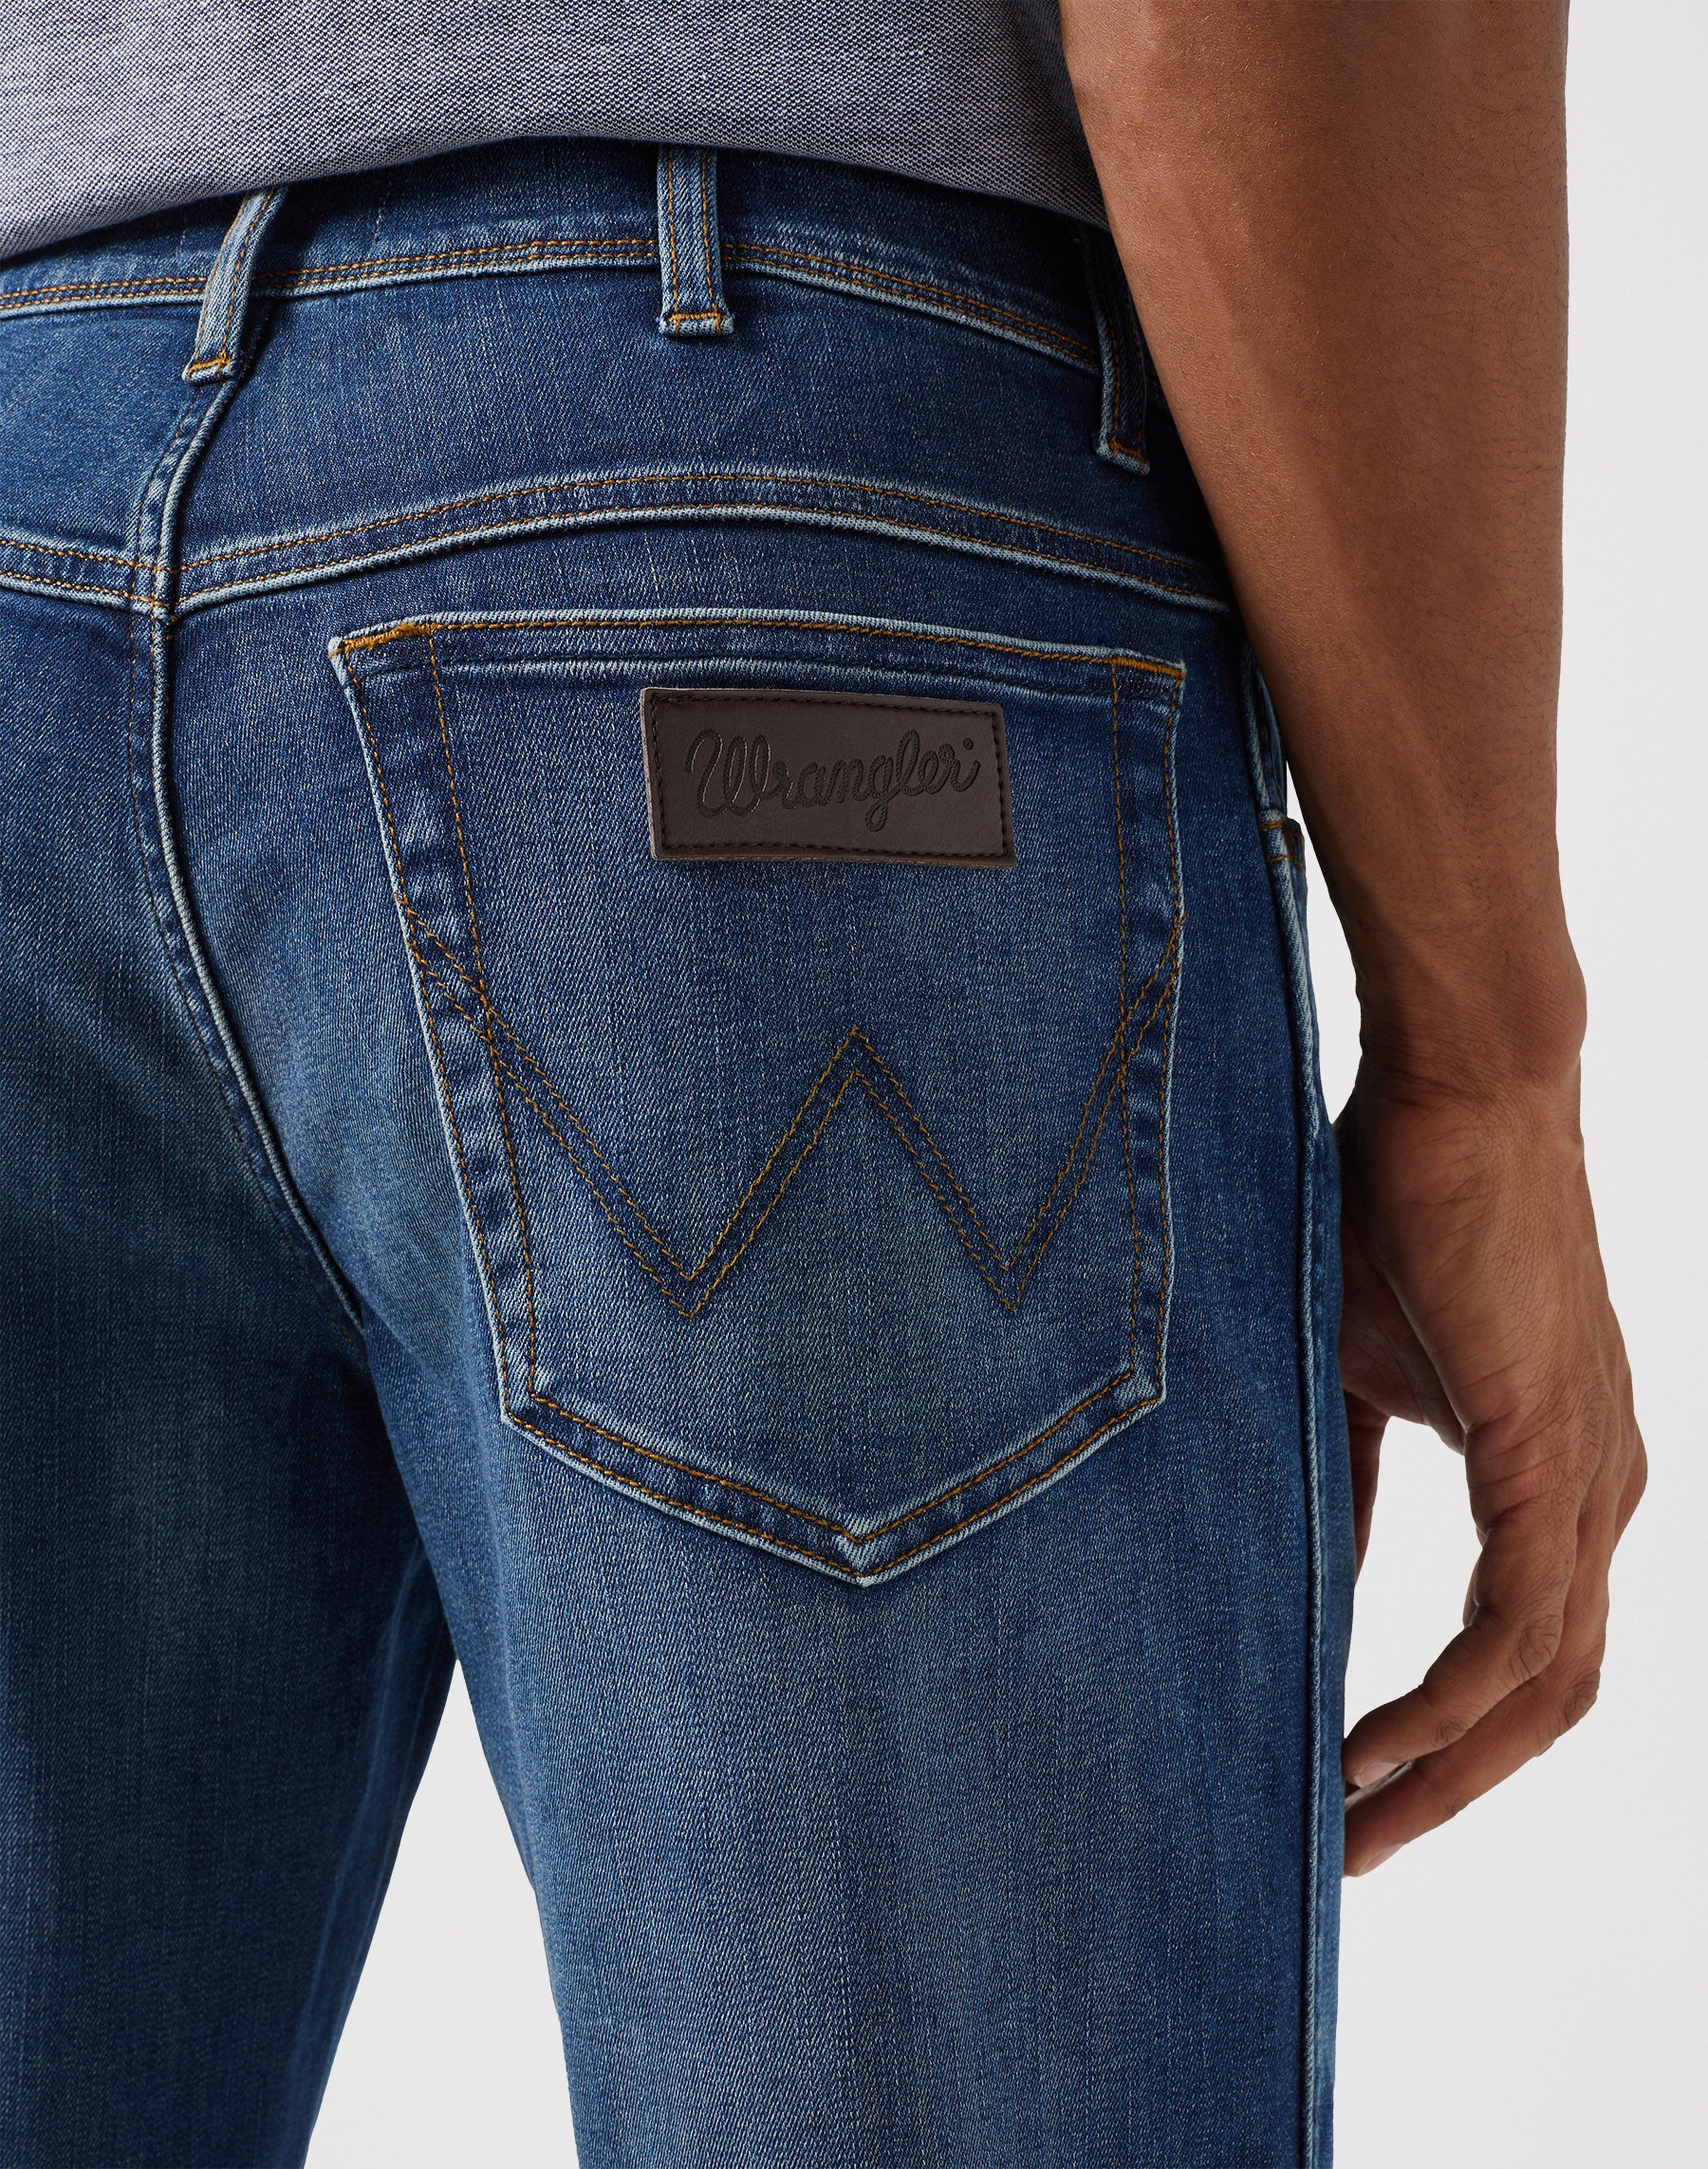 Texas Low Stretch in Hare Jeans Wrangler   